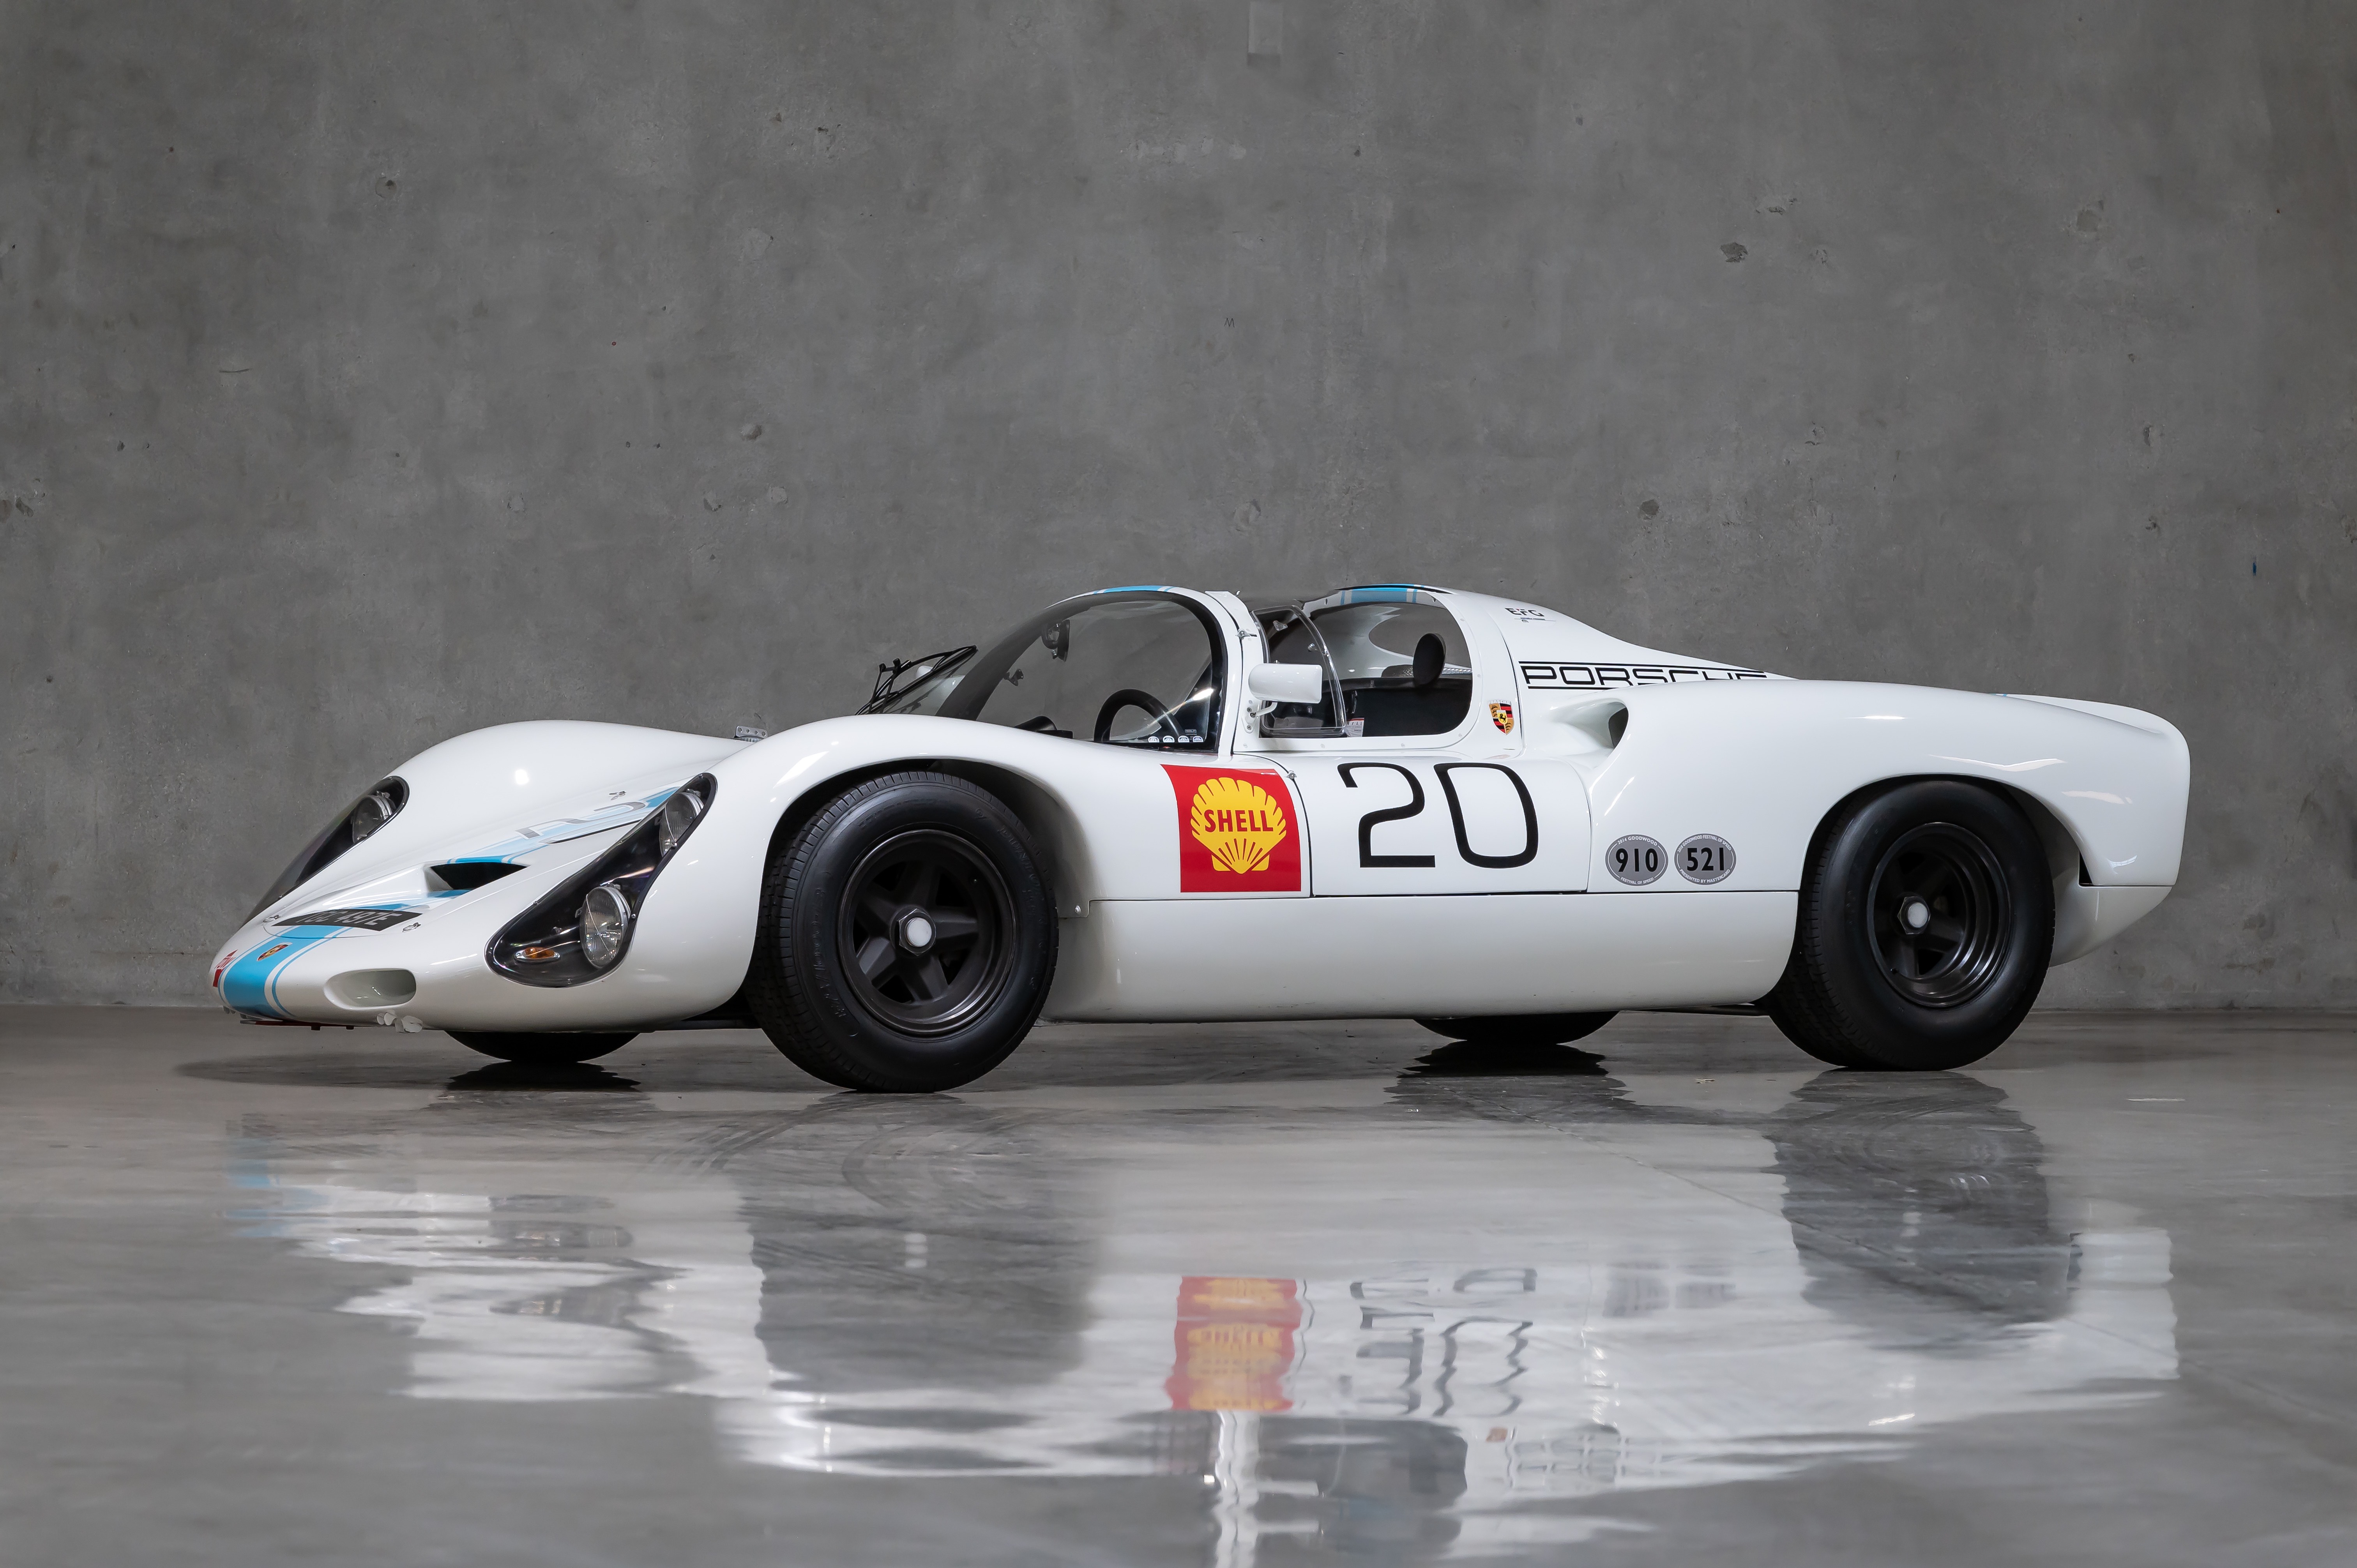 Broad Arrow Announces Porsche 75TH Anniversary Auction Highlights to be Displayed at Luftgekühlt 9 this 29-30 April